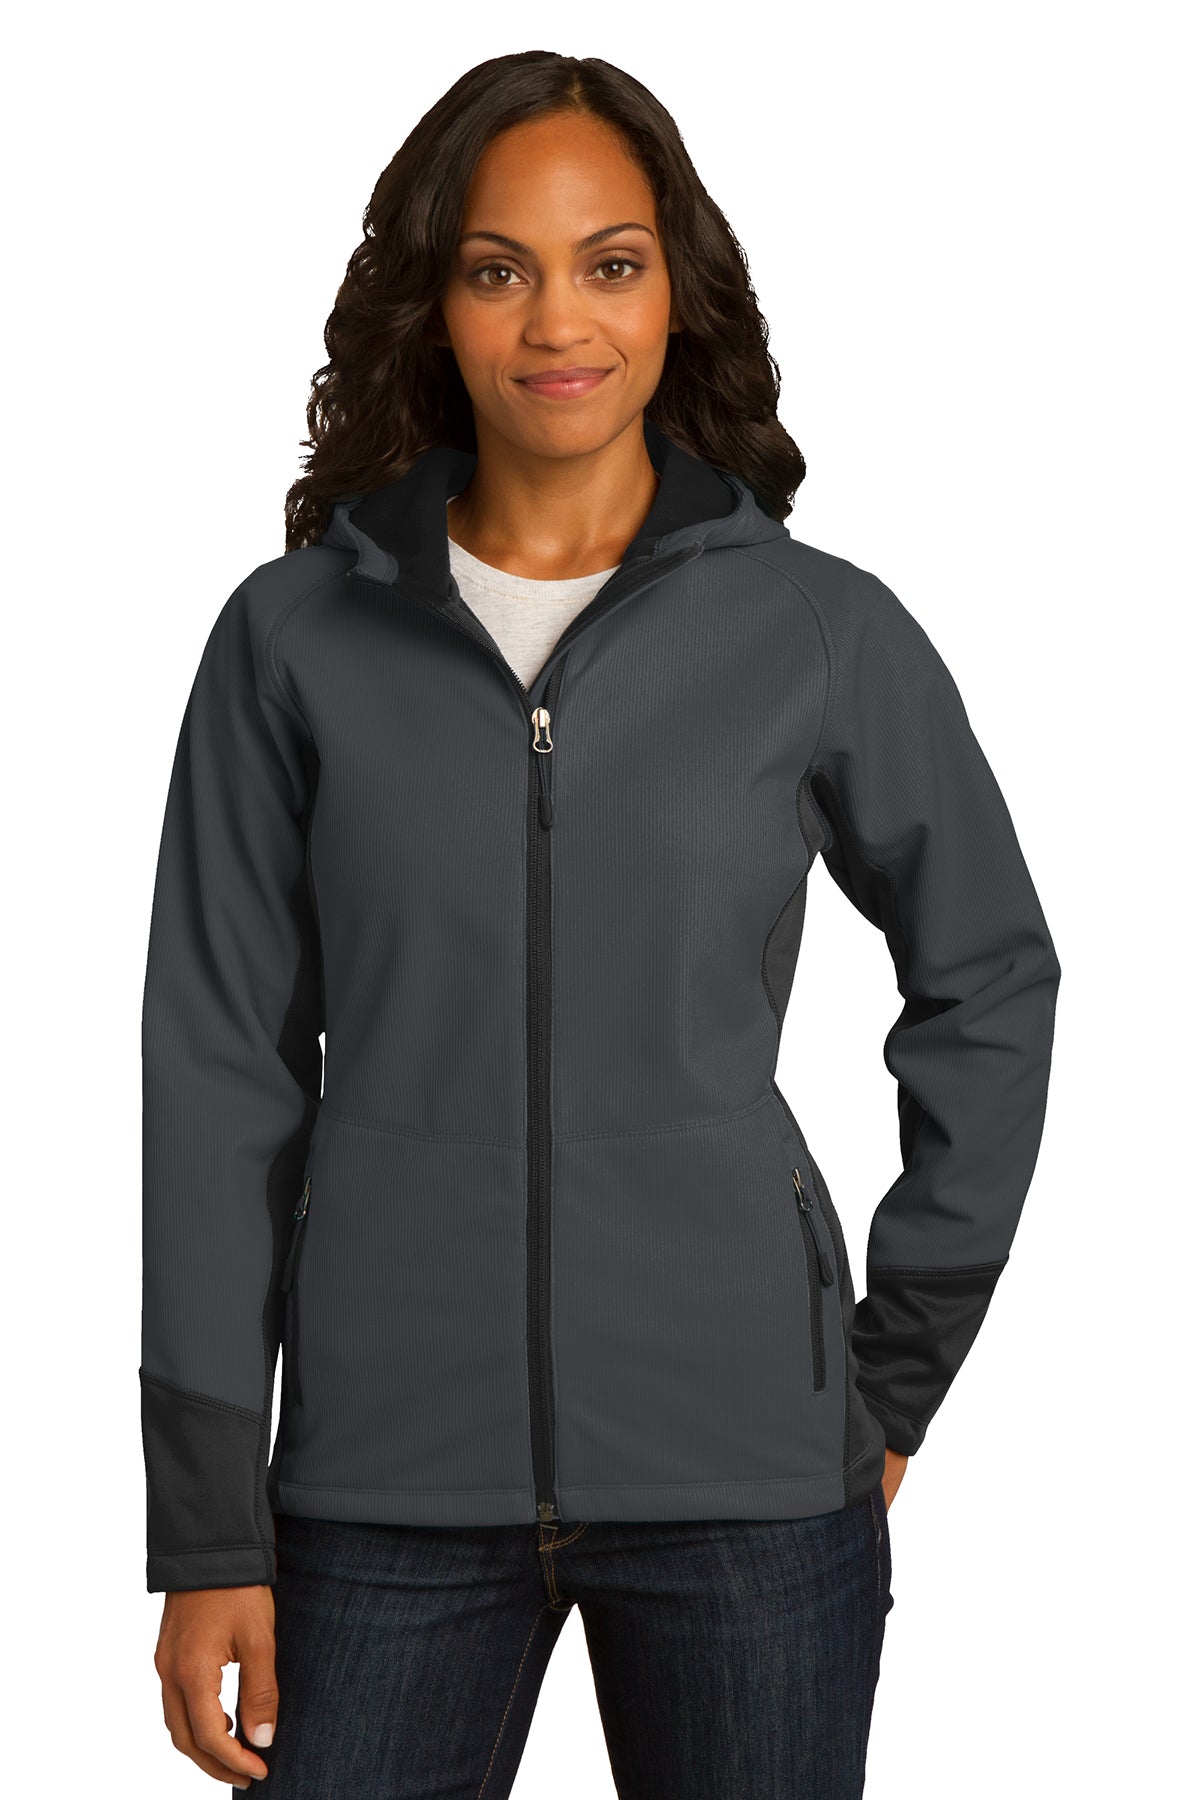 Port Authority Ladies Vertical Hooded Soft Shell Jacket. L319